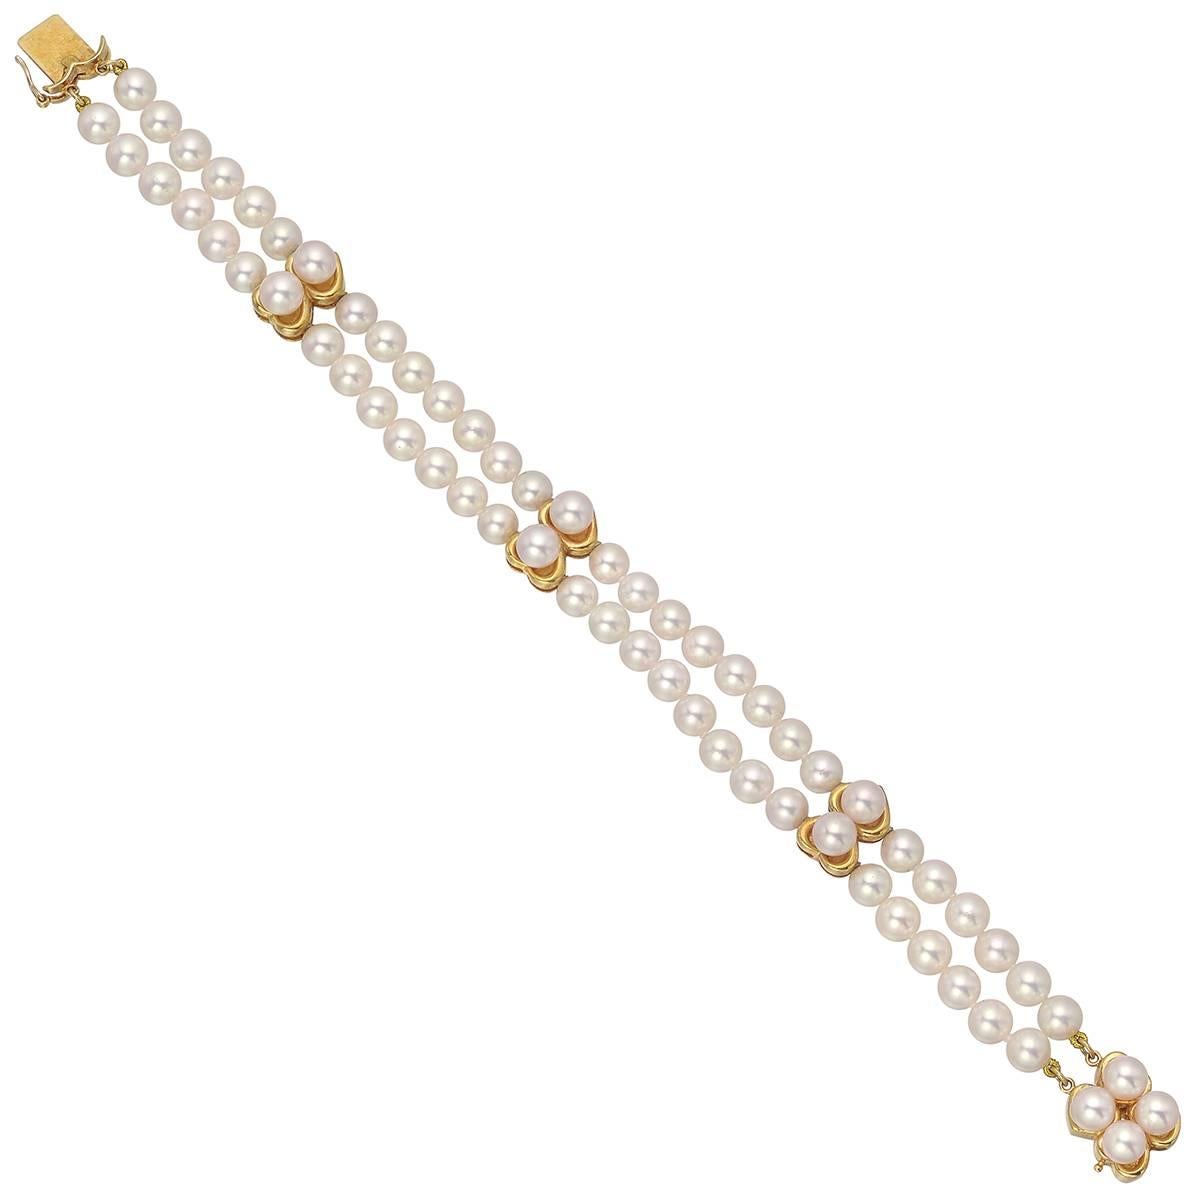 Two-Strand Pearl Bracelet with Gold Heart Accents